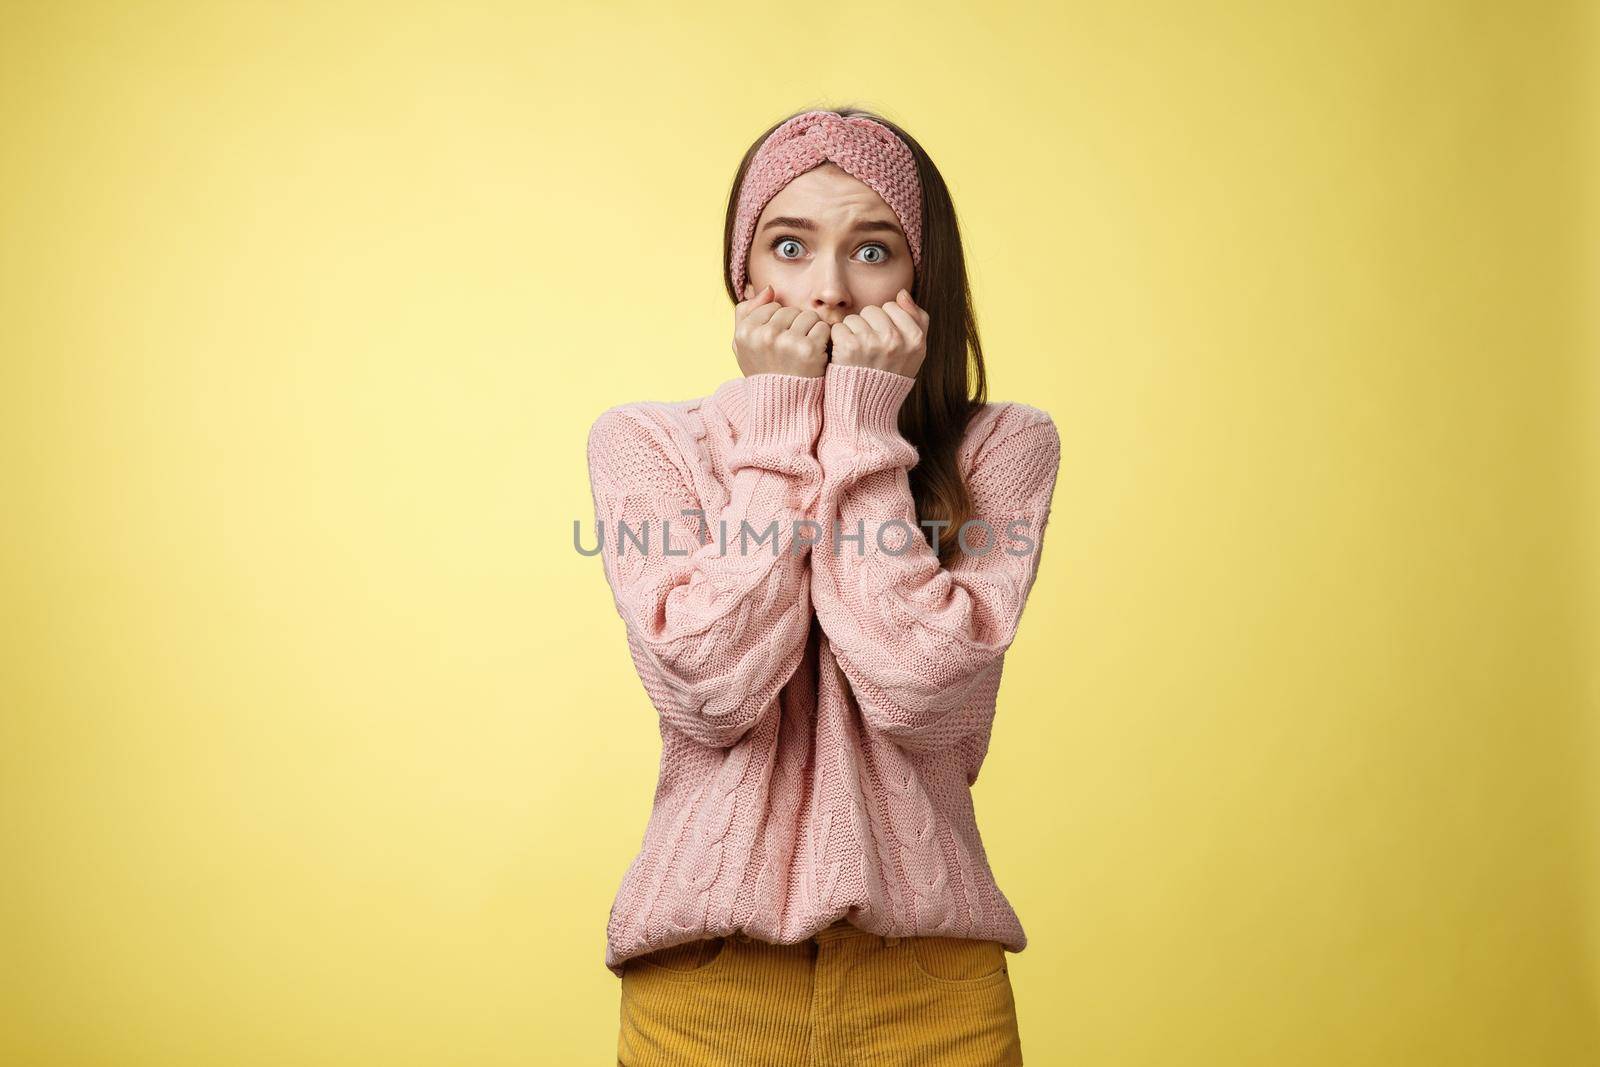 Stunned scared timid insecure cute young girl frightened gasping from fear pressing hands to mouth standing in stupor shocked, horrified stupified against yellow background being victim of abuse by Benzoix